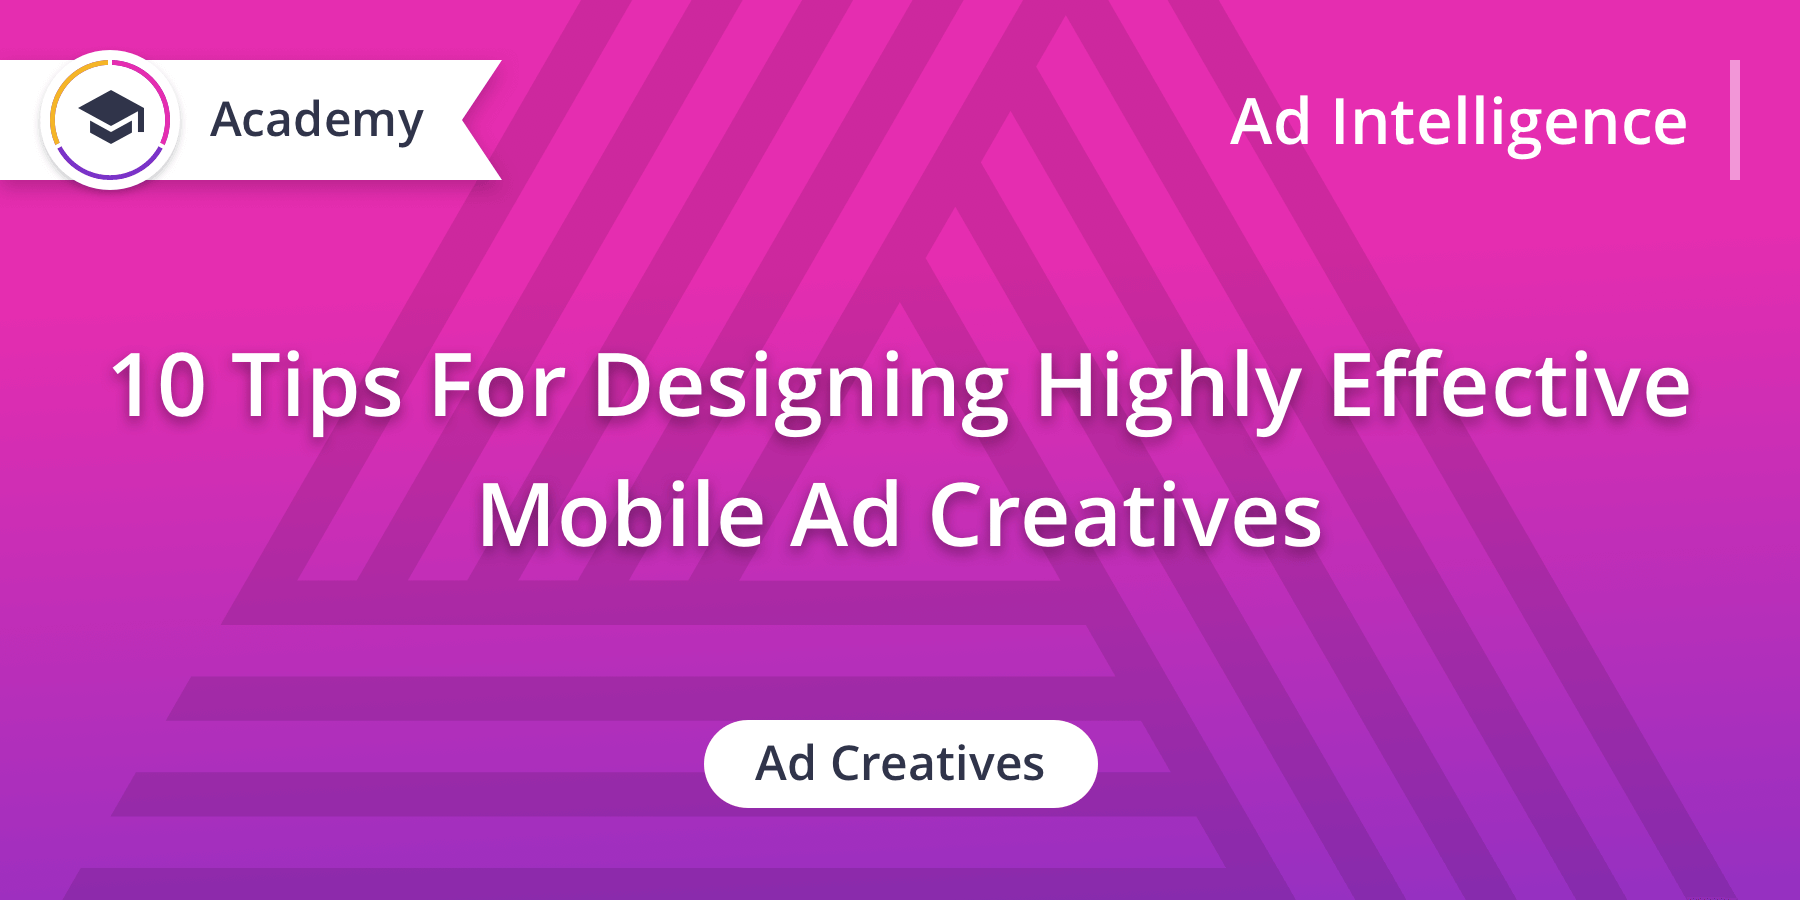 10 Tips For Designing Highly Effective Mobile Ad Creatives